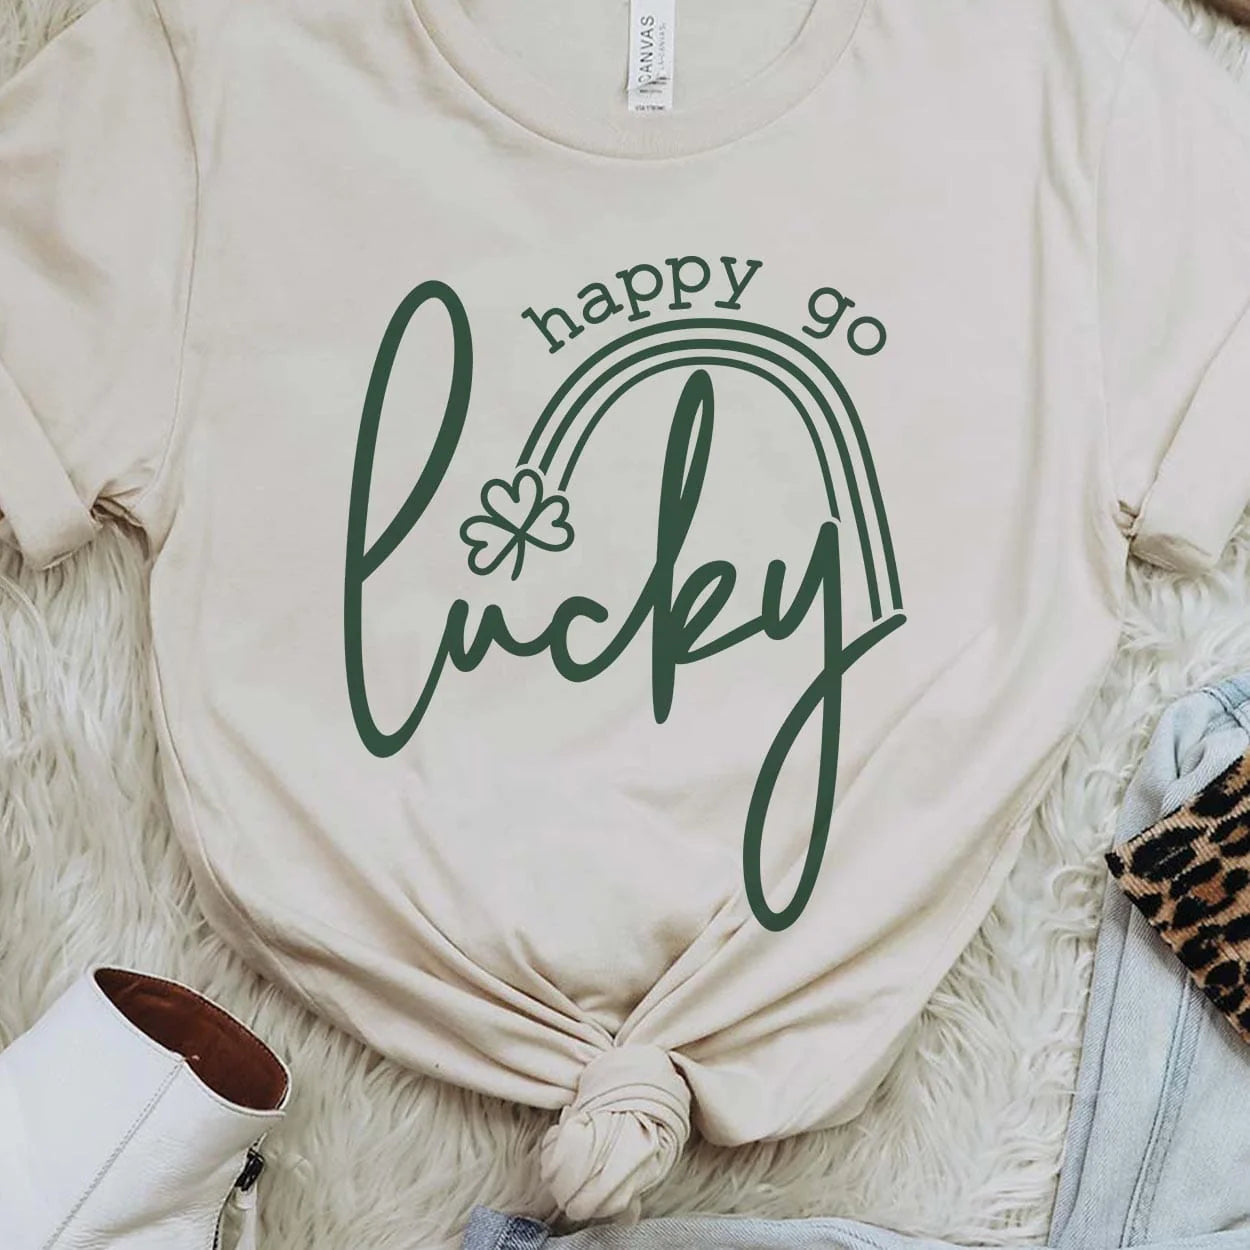 A cream crew neck sweatshirt featuring the words "Happy go lucky". "Lucky" being in the center in cursive while "happy go" is above "lucky" in a smaller font. Between the two is a small rainbow with a clover at the end. Item is pictured on a white background.